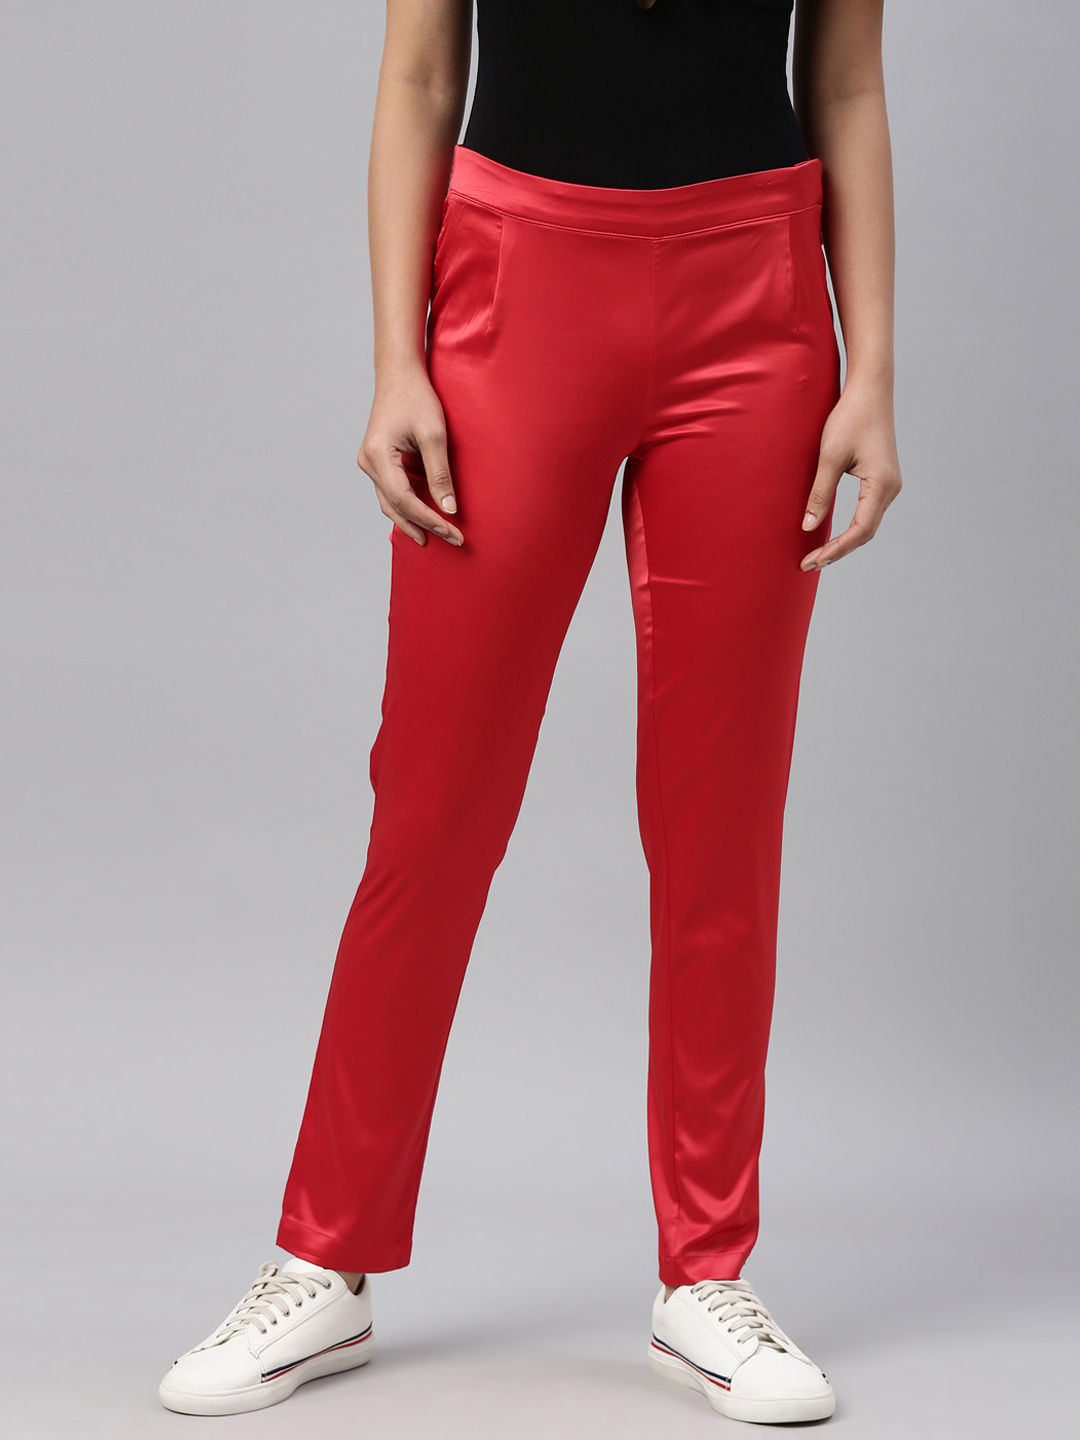 Ladies Red Trousers  WideLegged  HighWaisted  HM IN